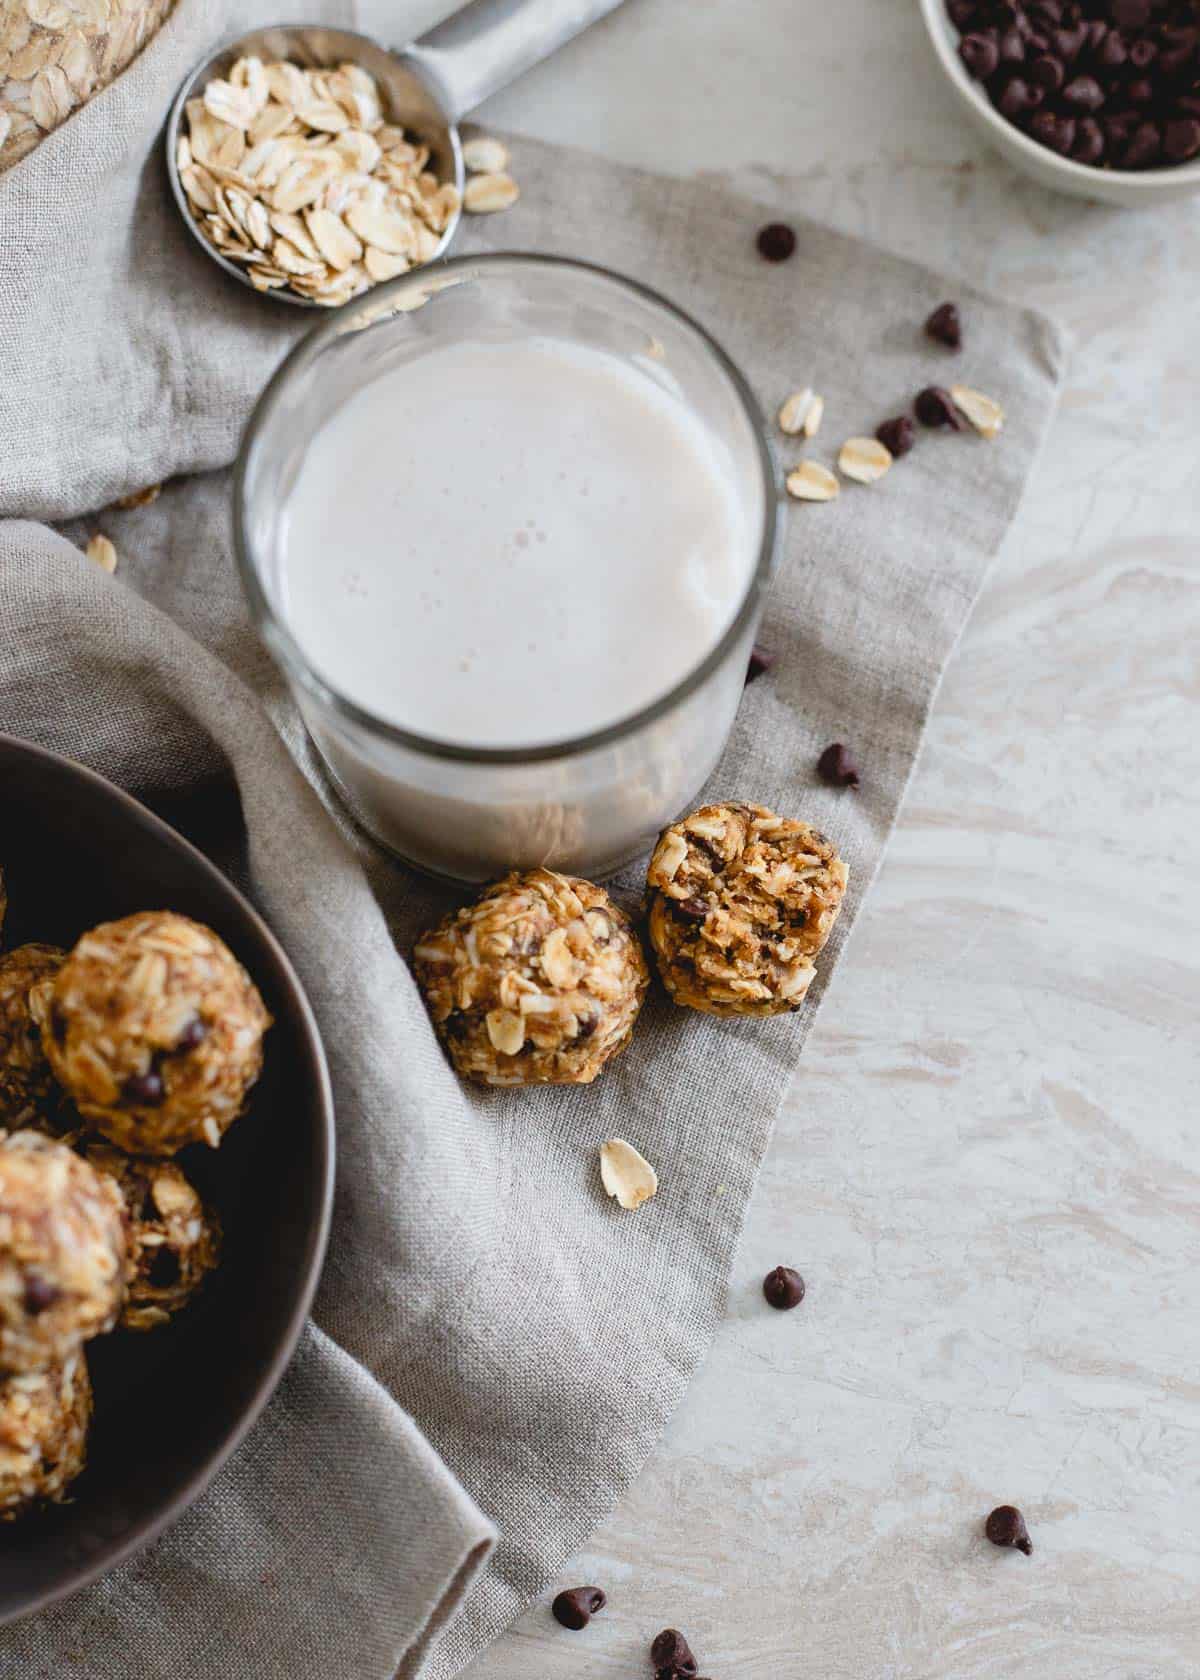 No bake peanut butter chocolate chip balls are a healthy snack that work double duty as a sweet treat!